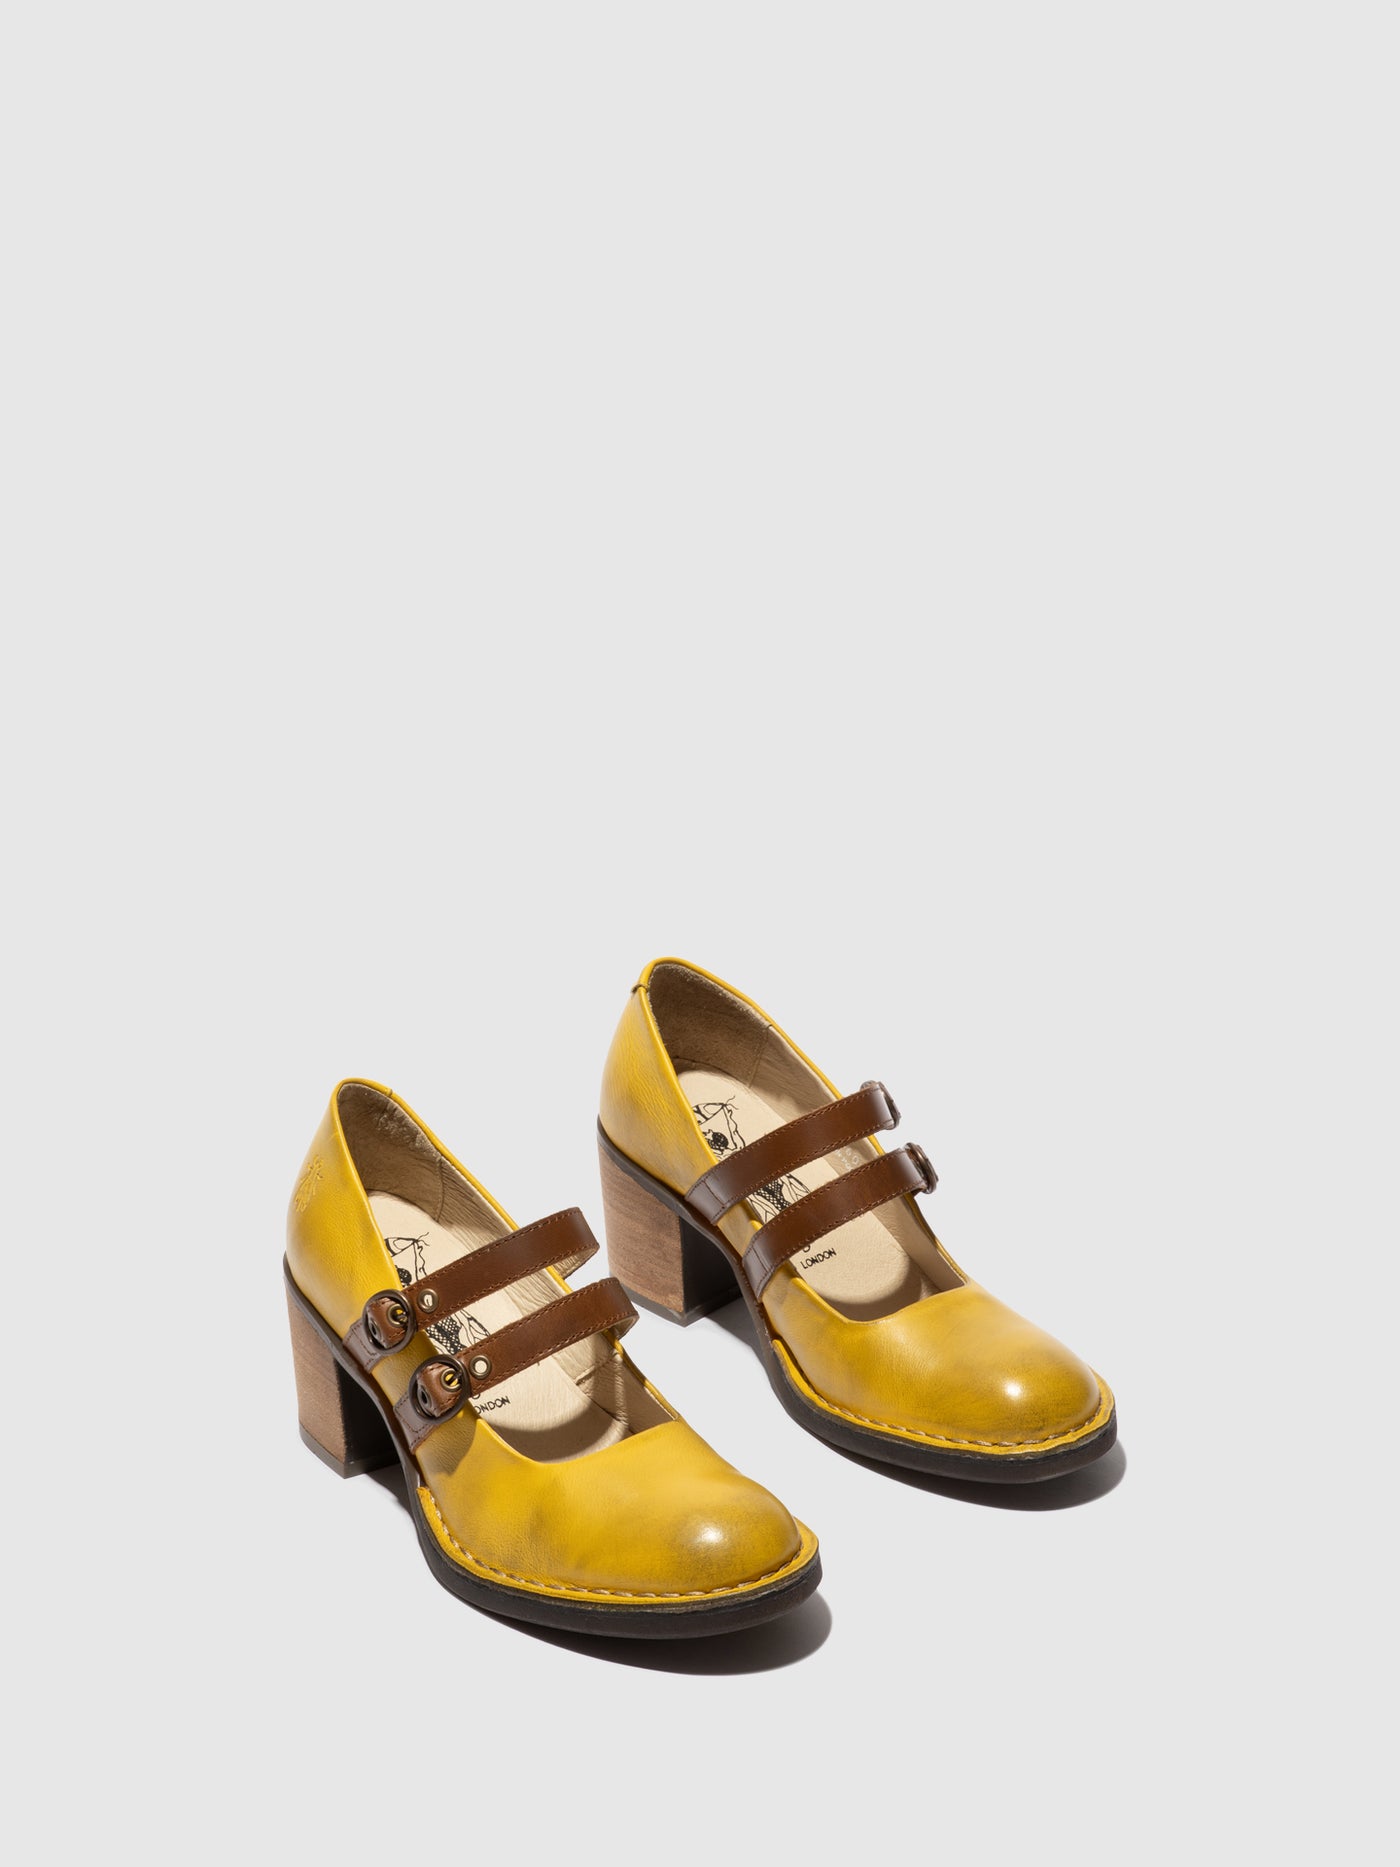 Double Buckle Shoes BALY106FLY YELLOW/CAMEL